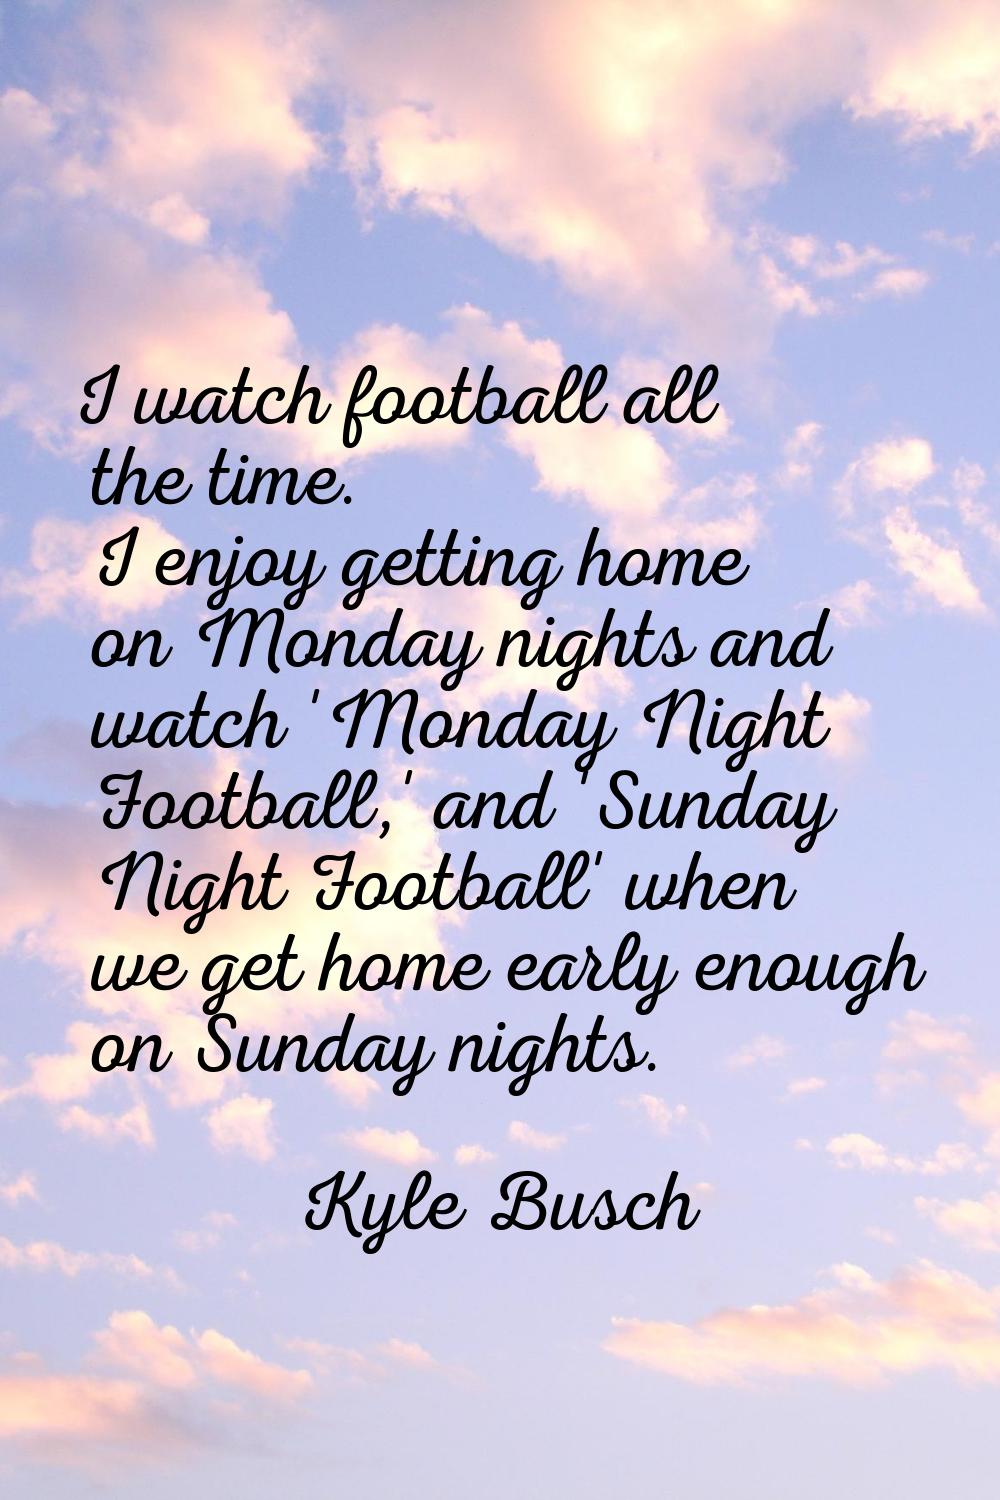 I watch football all the time. I enjoy getting home on Monday nights and watch 'Monday Night Footba